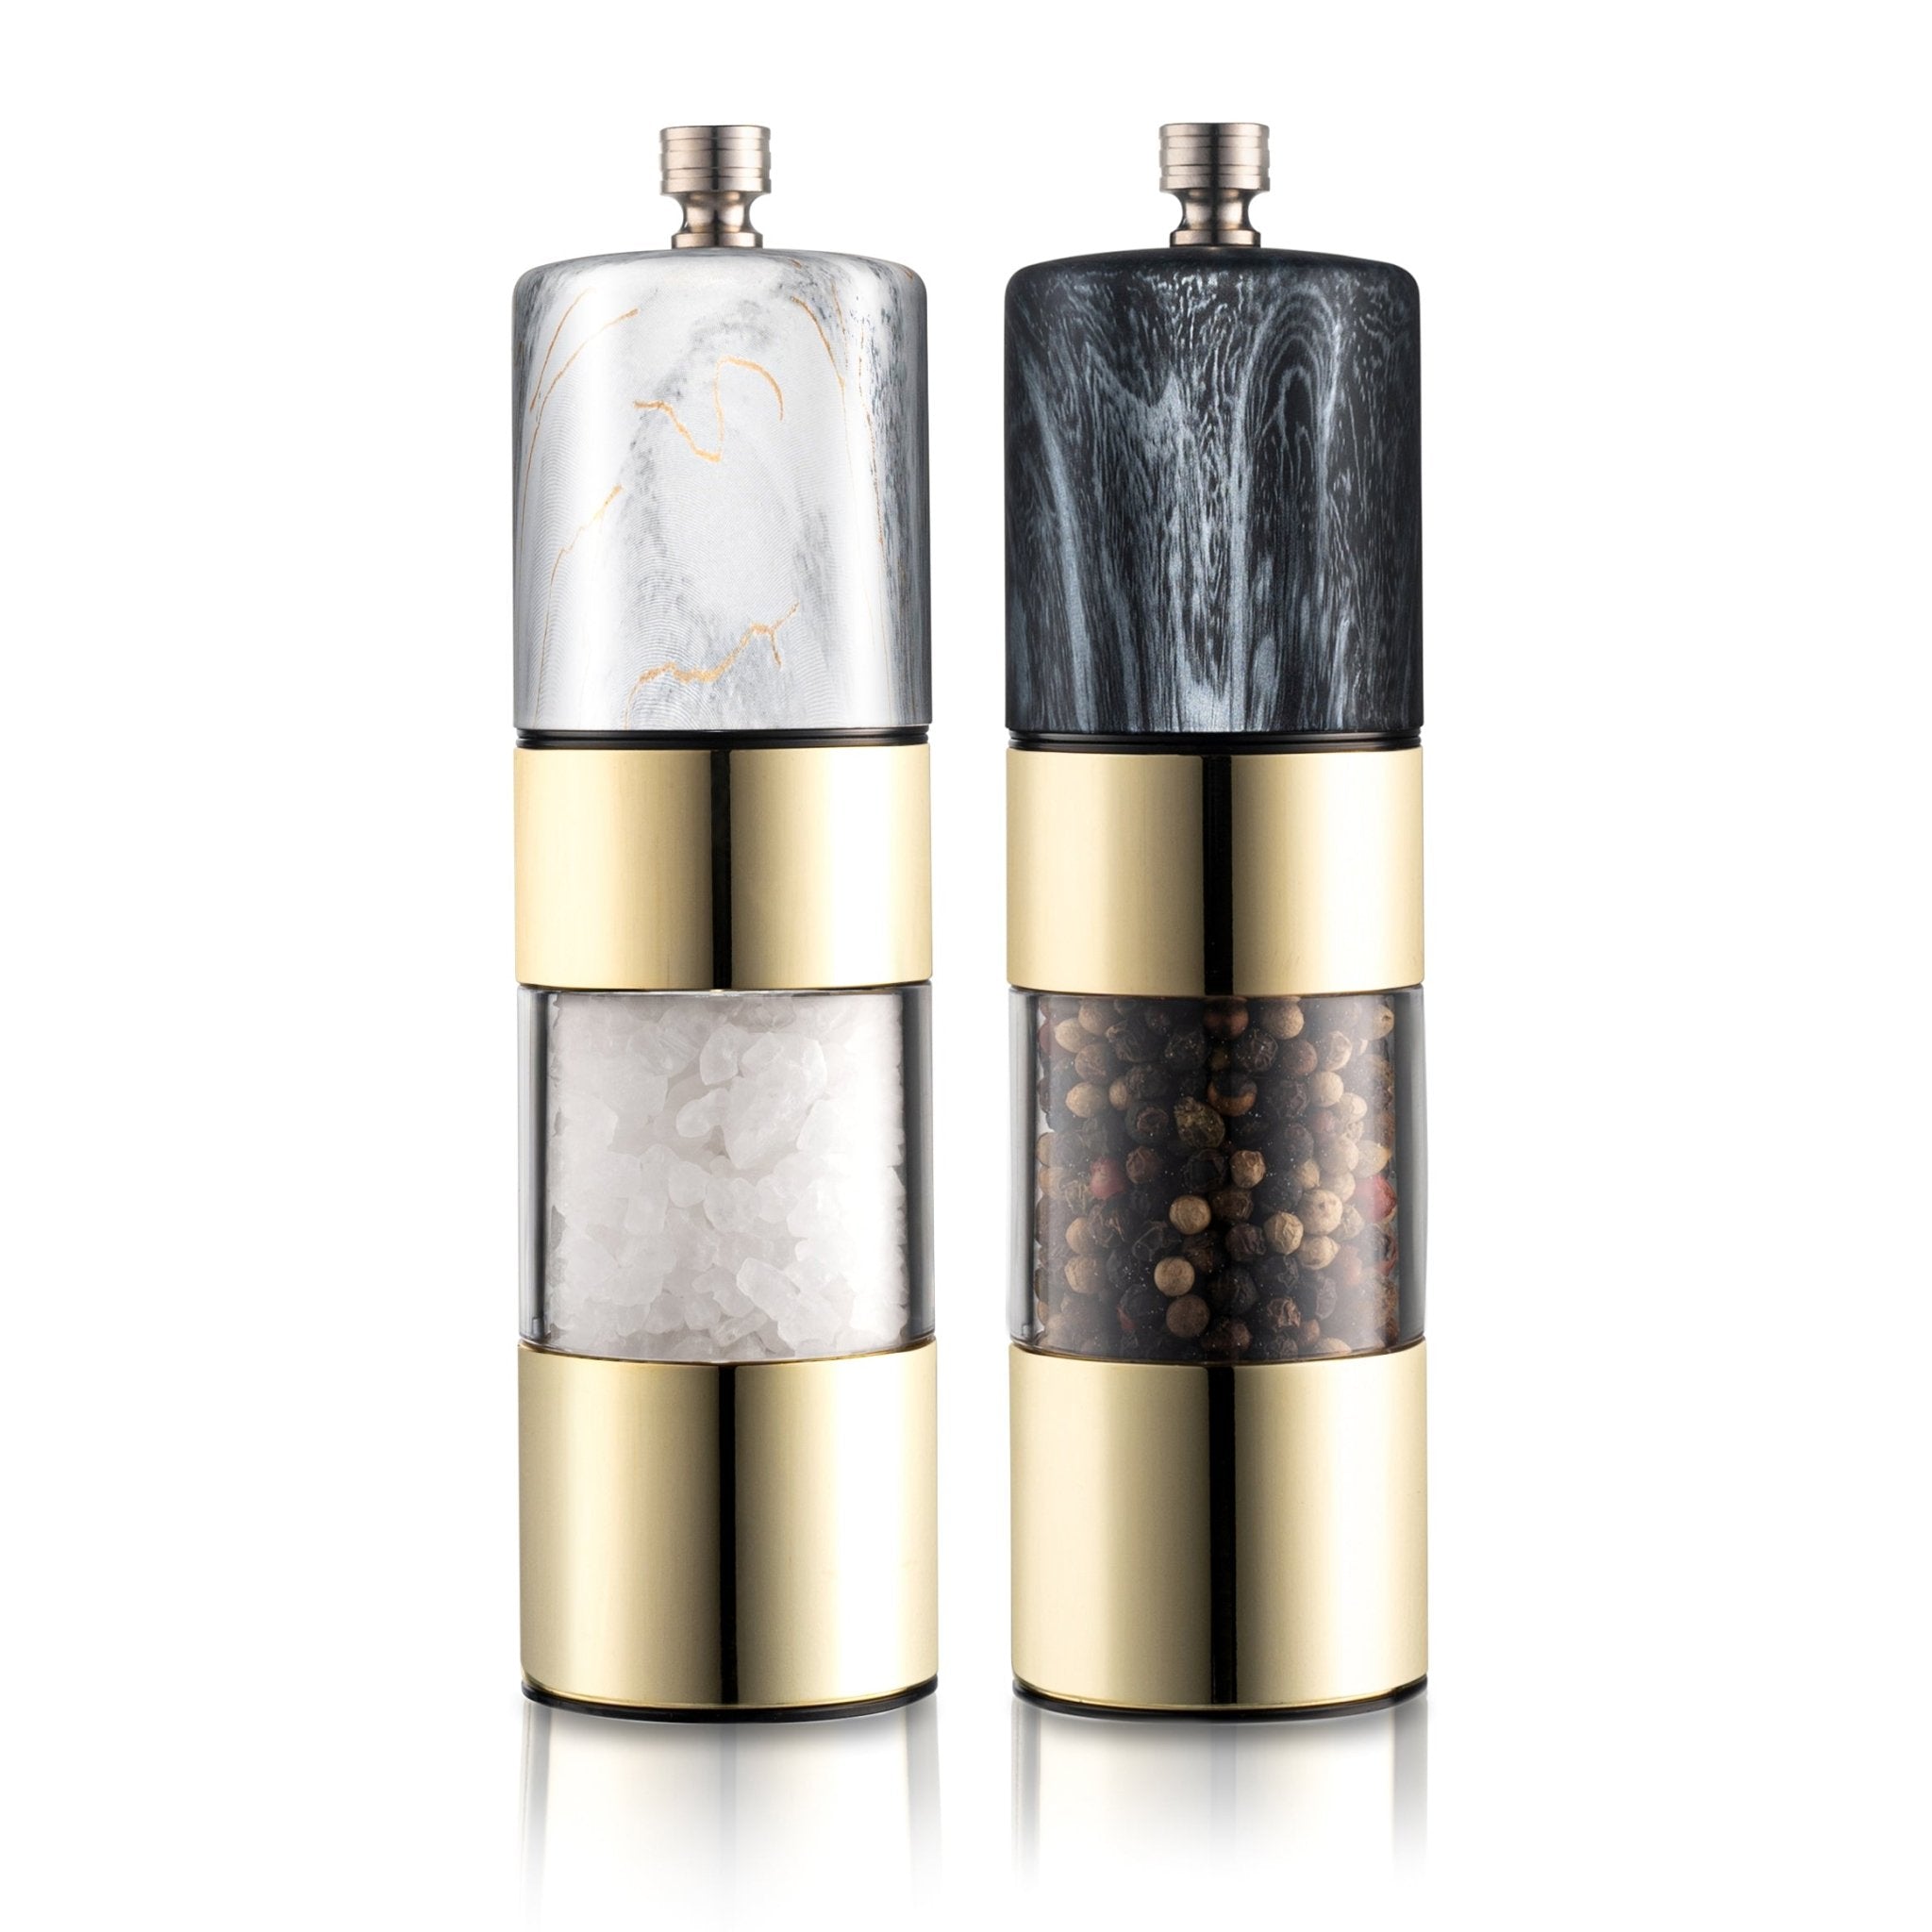 https://cdn.shopify.com/s/files/1/0778/8937/products/marble-top-pepper-mill-set-212929.jpg?v=1694450658&width=2048